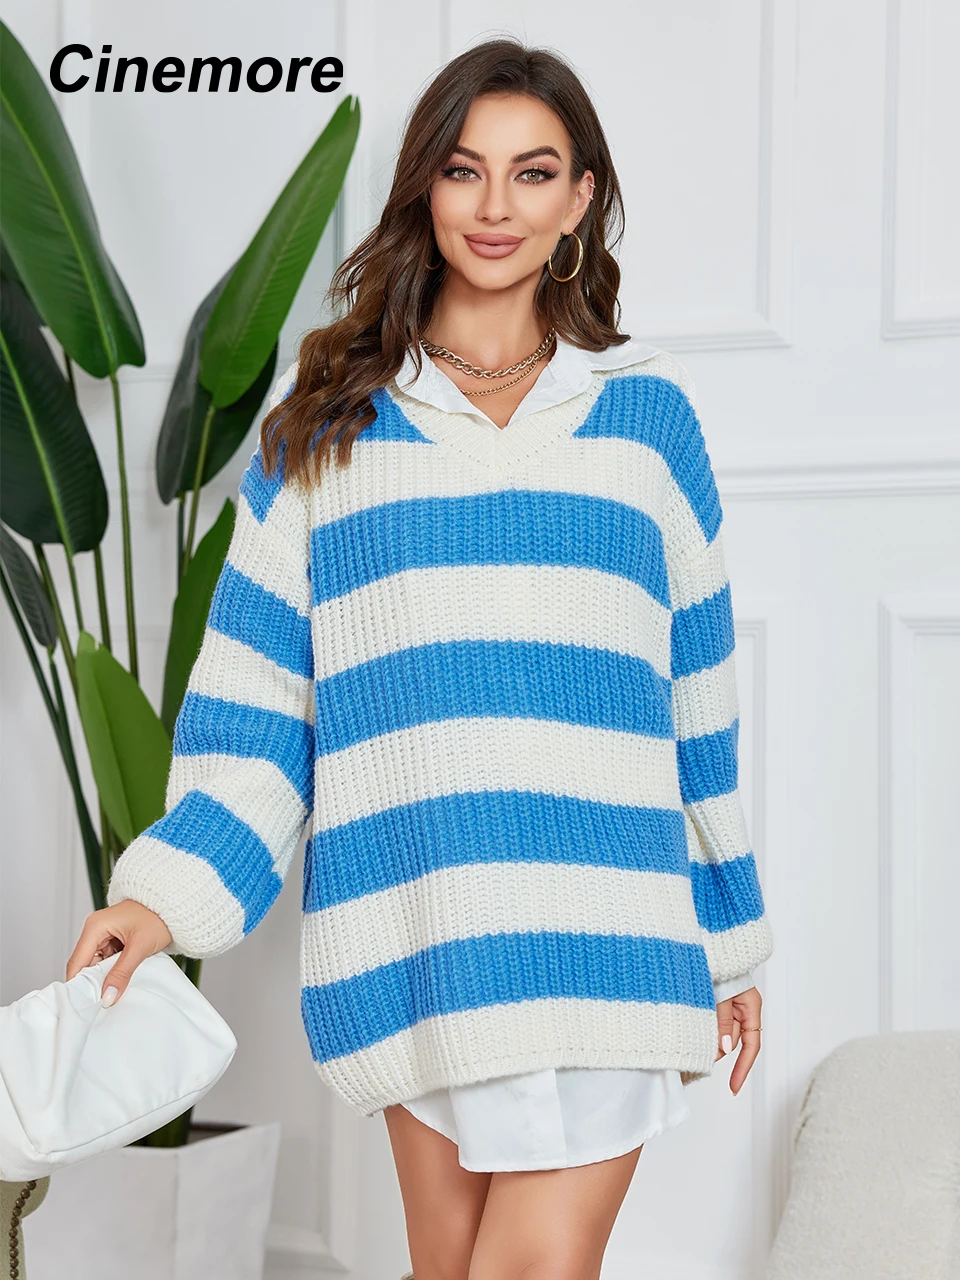 

Cinemore New Women's Pullover Sweater Long Sleeve Casual Warm V Neck Loose Soft Striped Knitted Jumper Cashmere Bottom Shirt Top